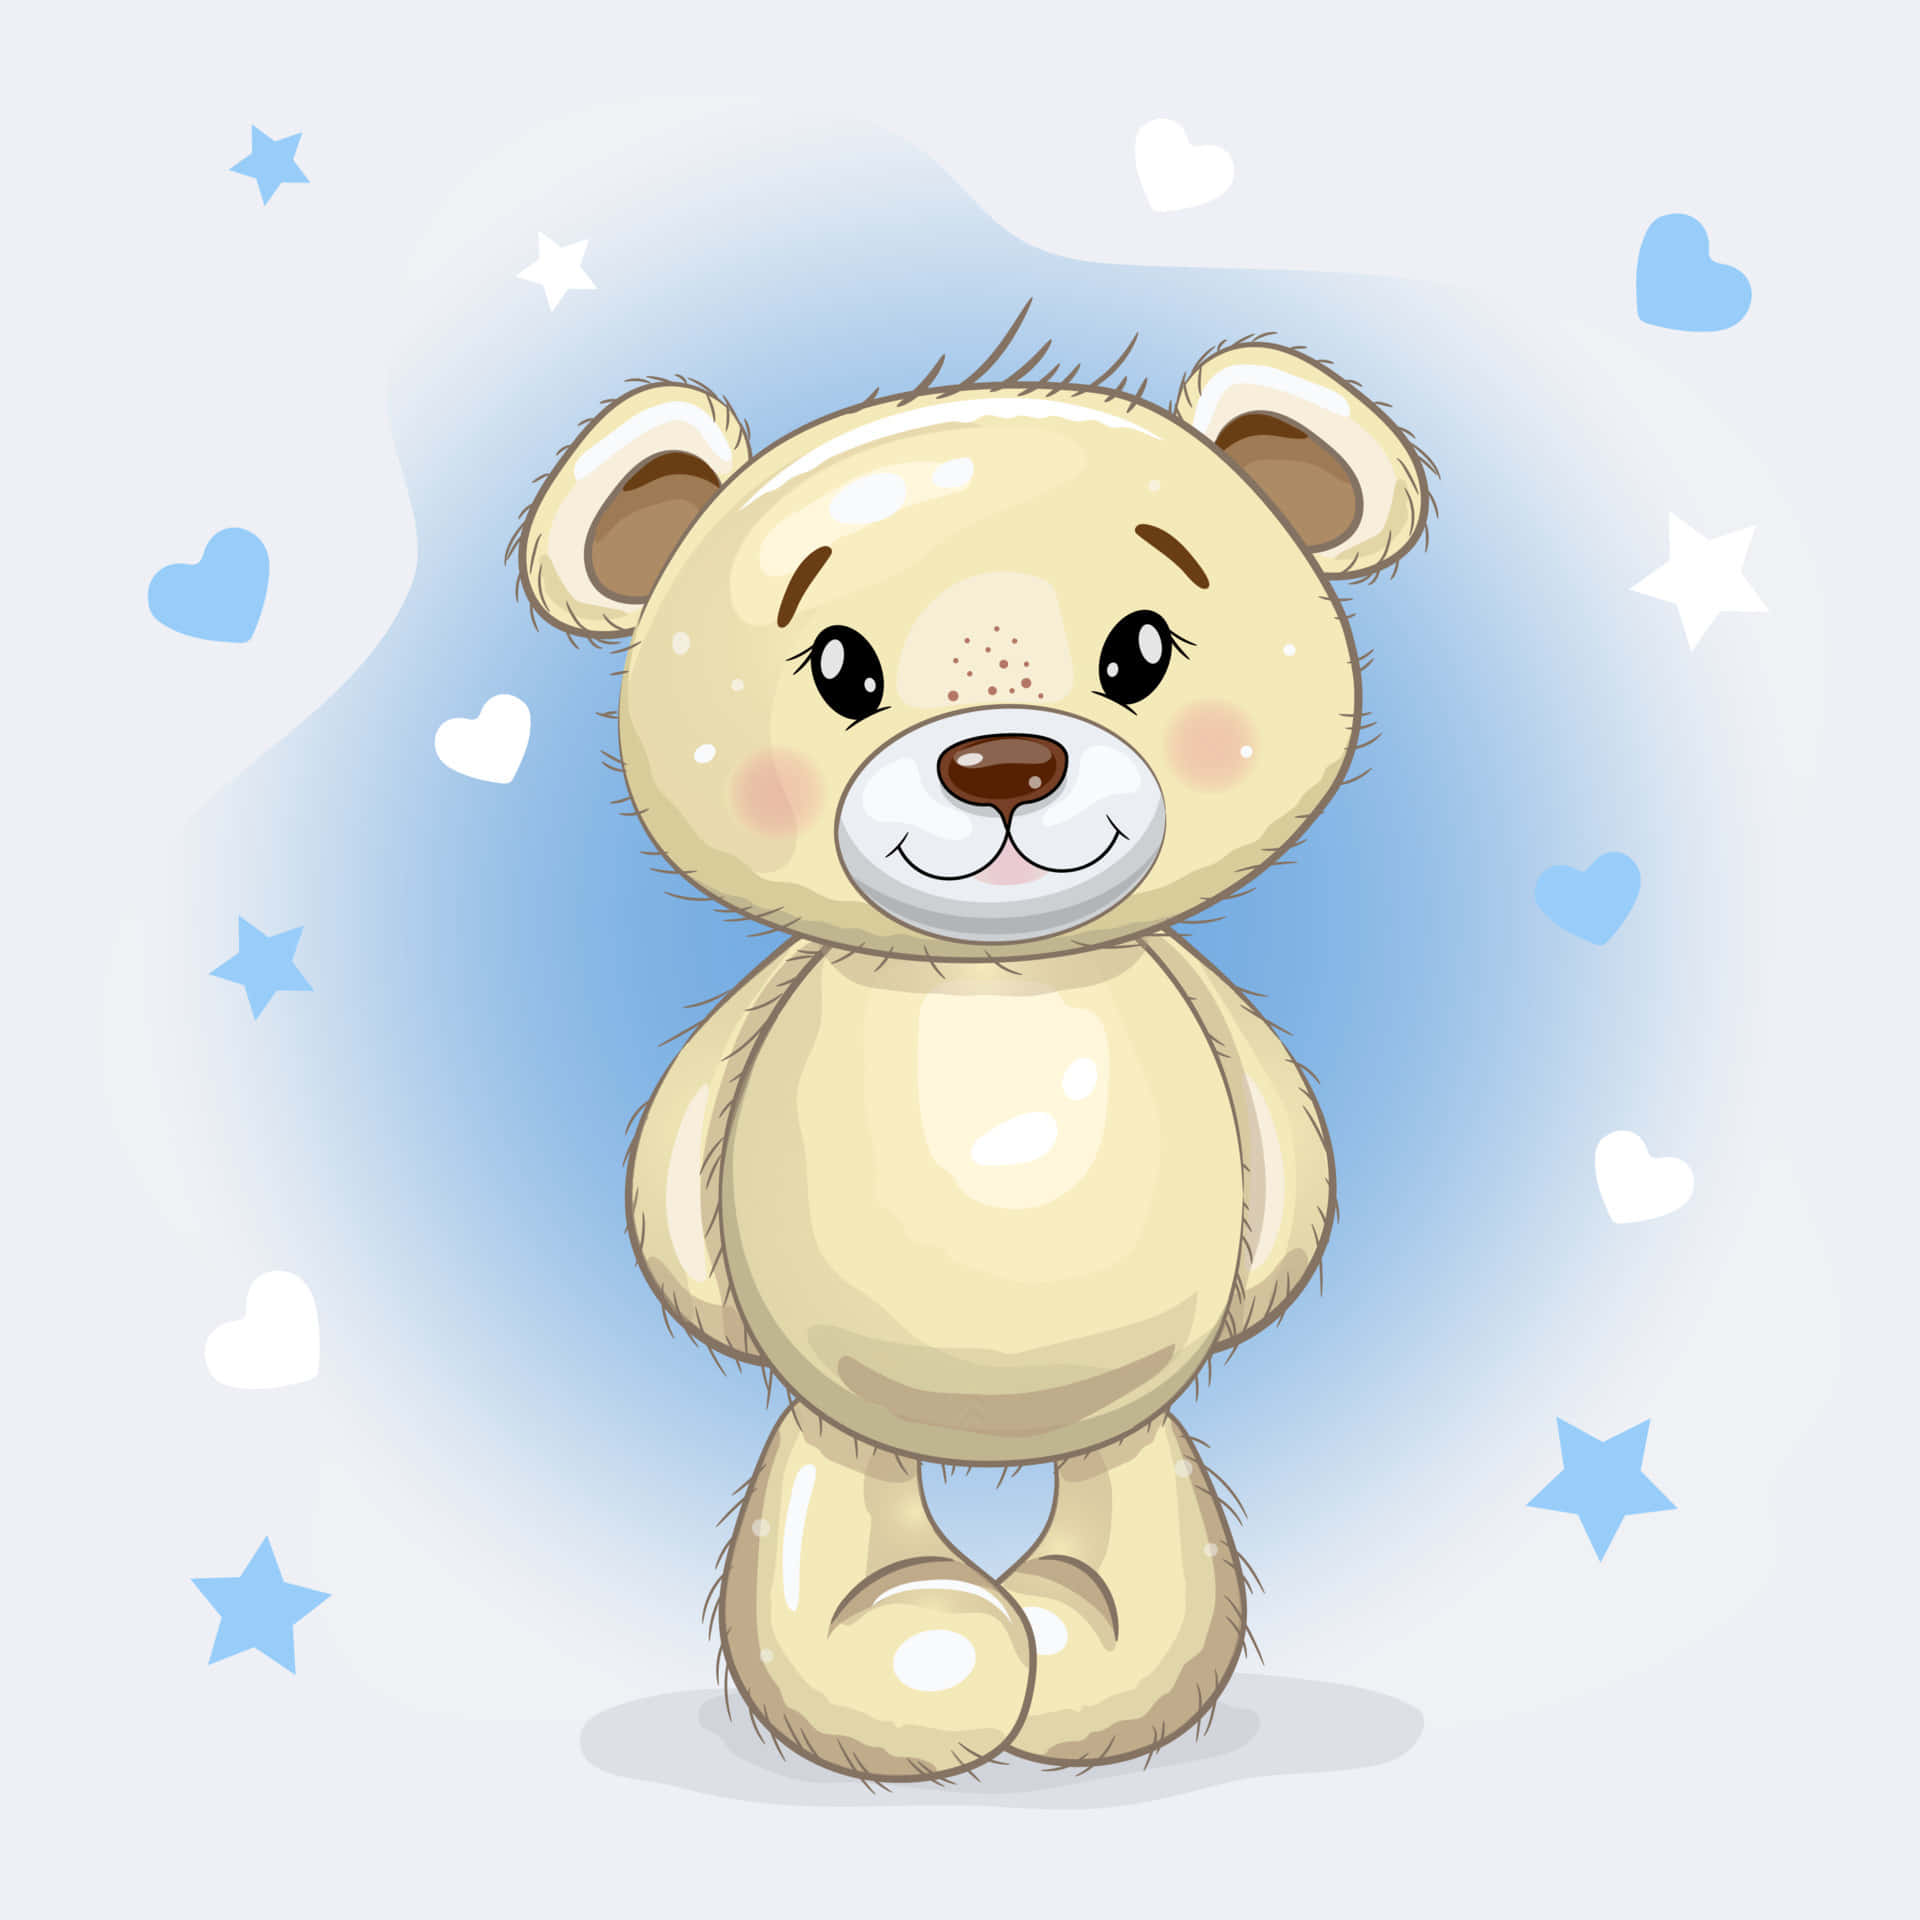 Spread love and brightness with this warm and loving teddy bear.